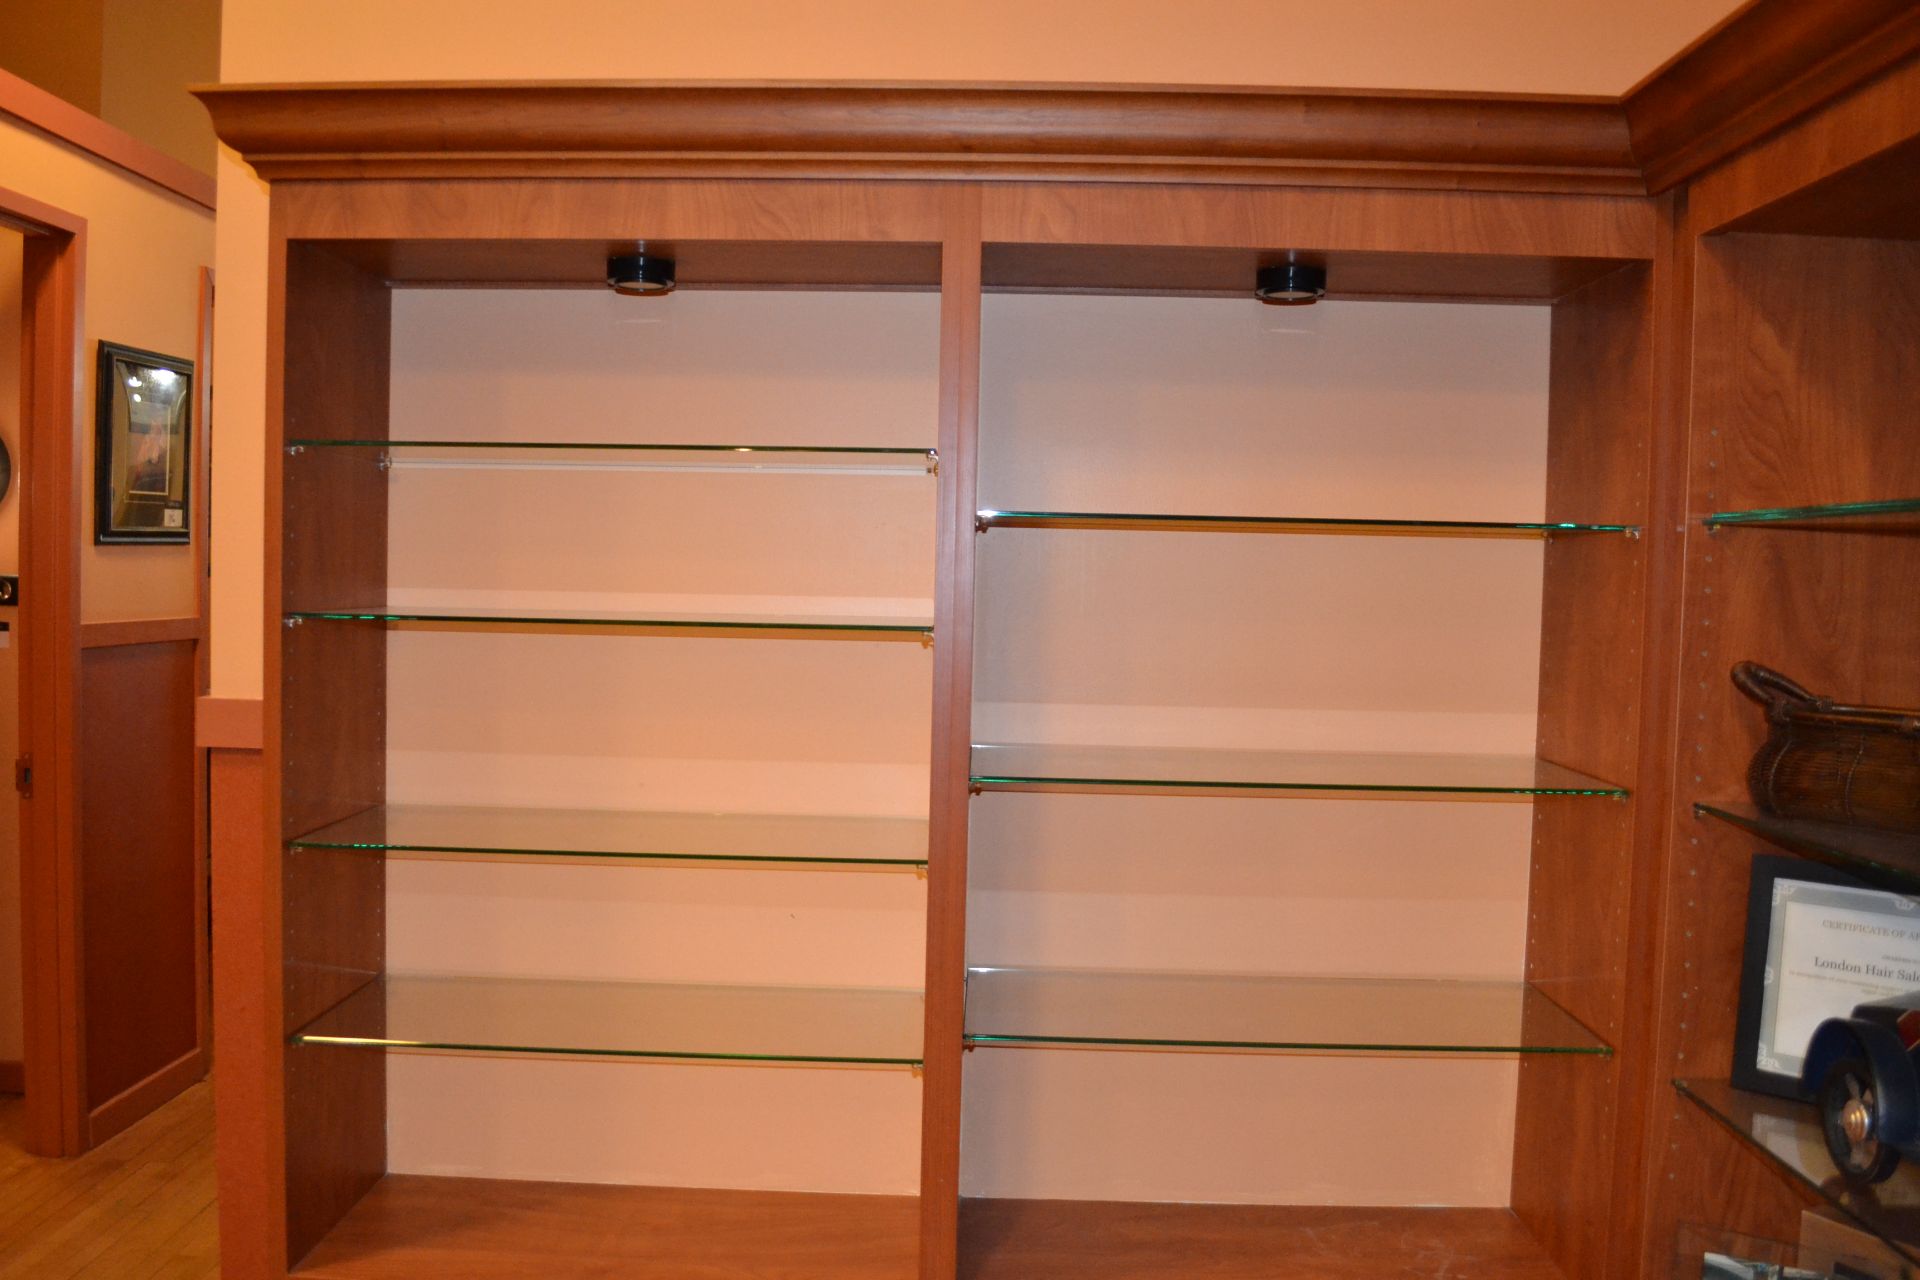 Cherry Formica Corner Shelving w/ Bottom Cabinets - Image 5 of 6